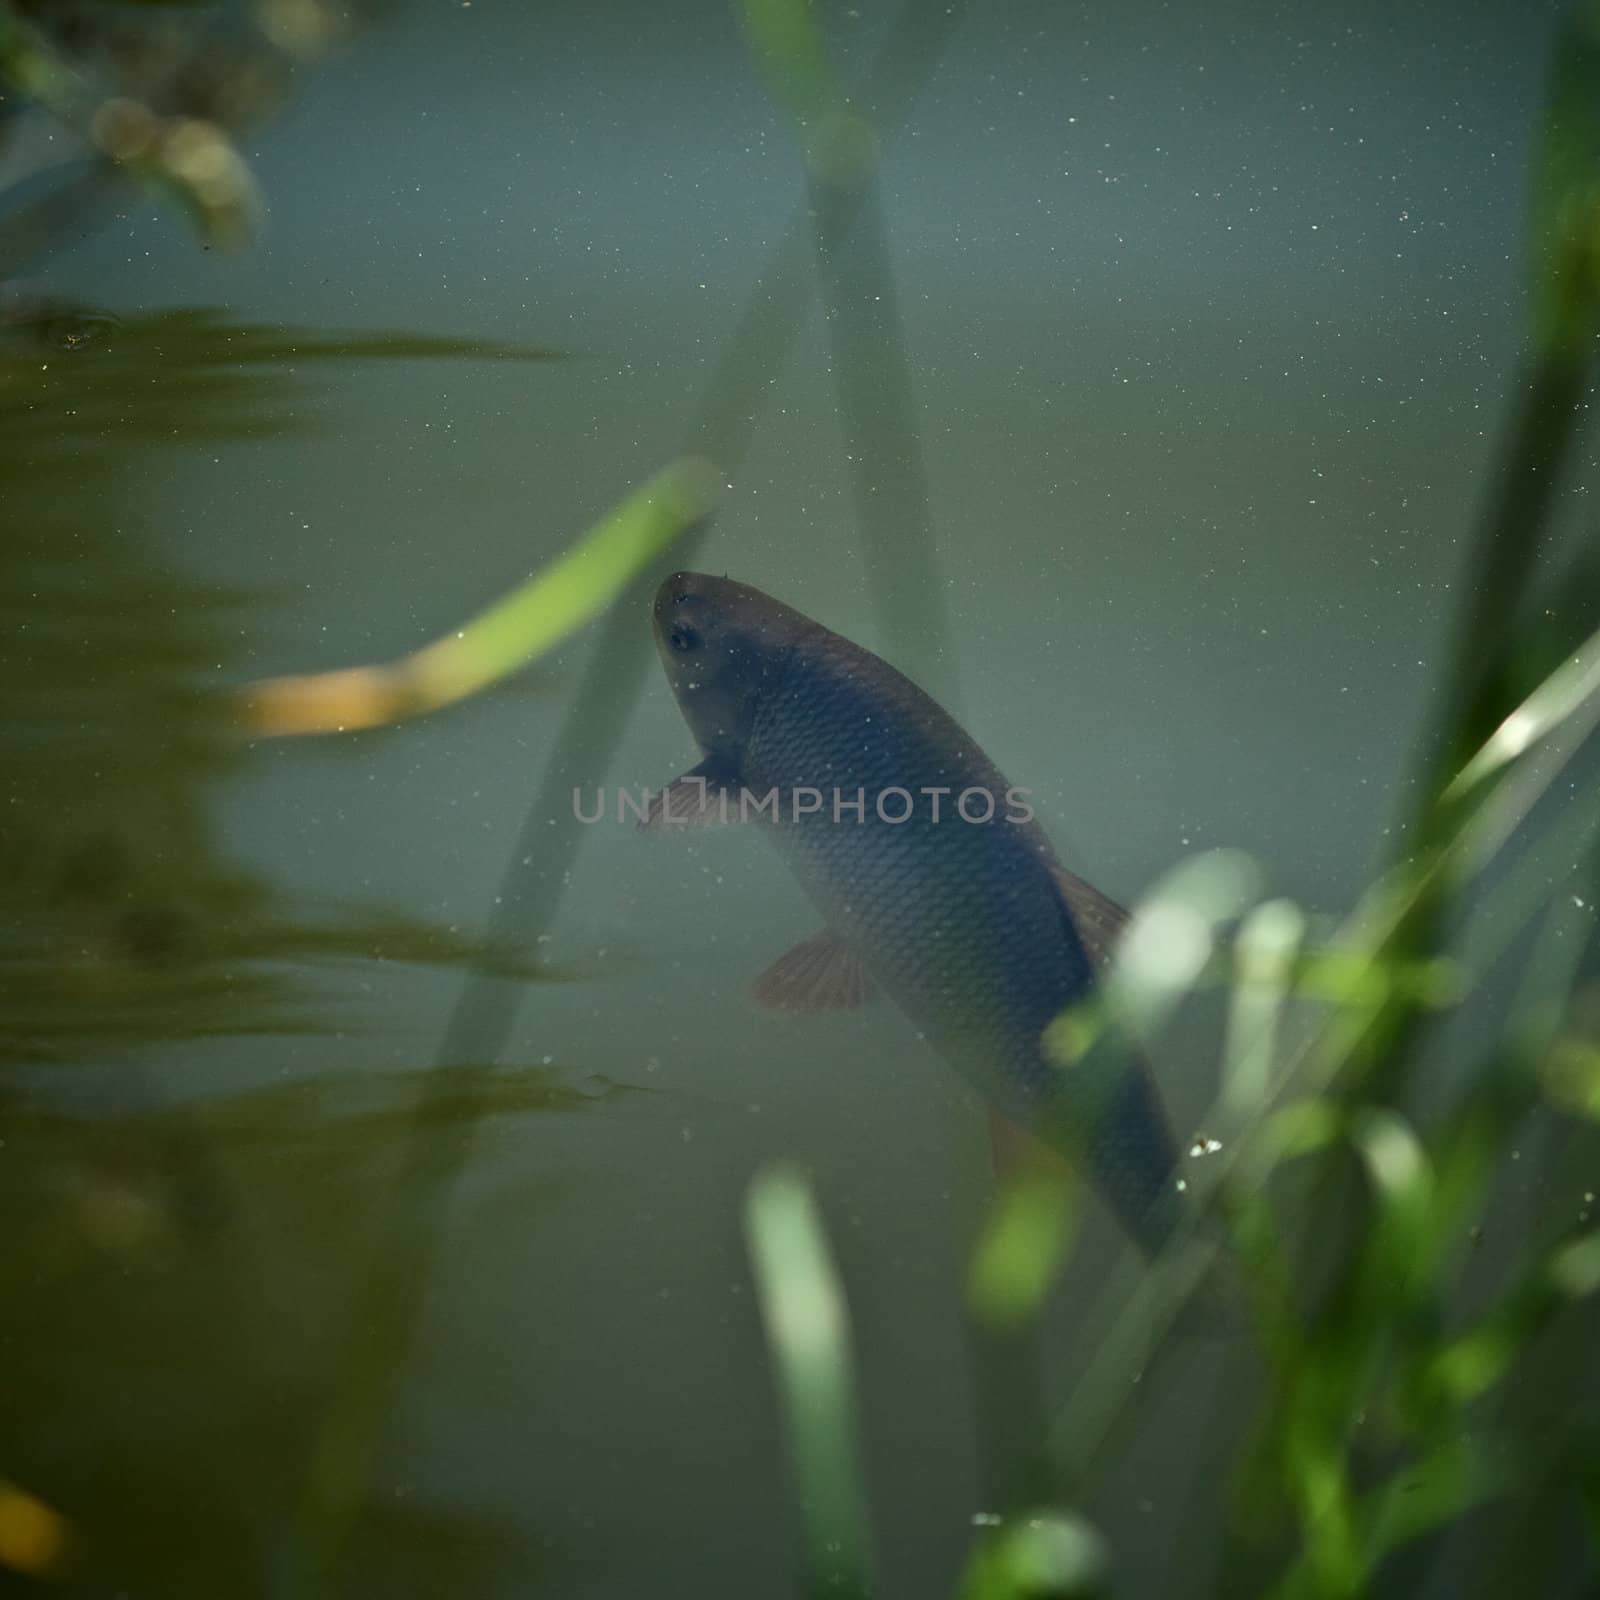 Singing carp fish coming out of the water by petr_malyshev